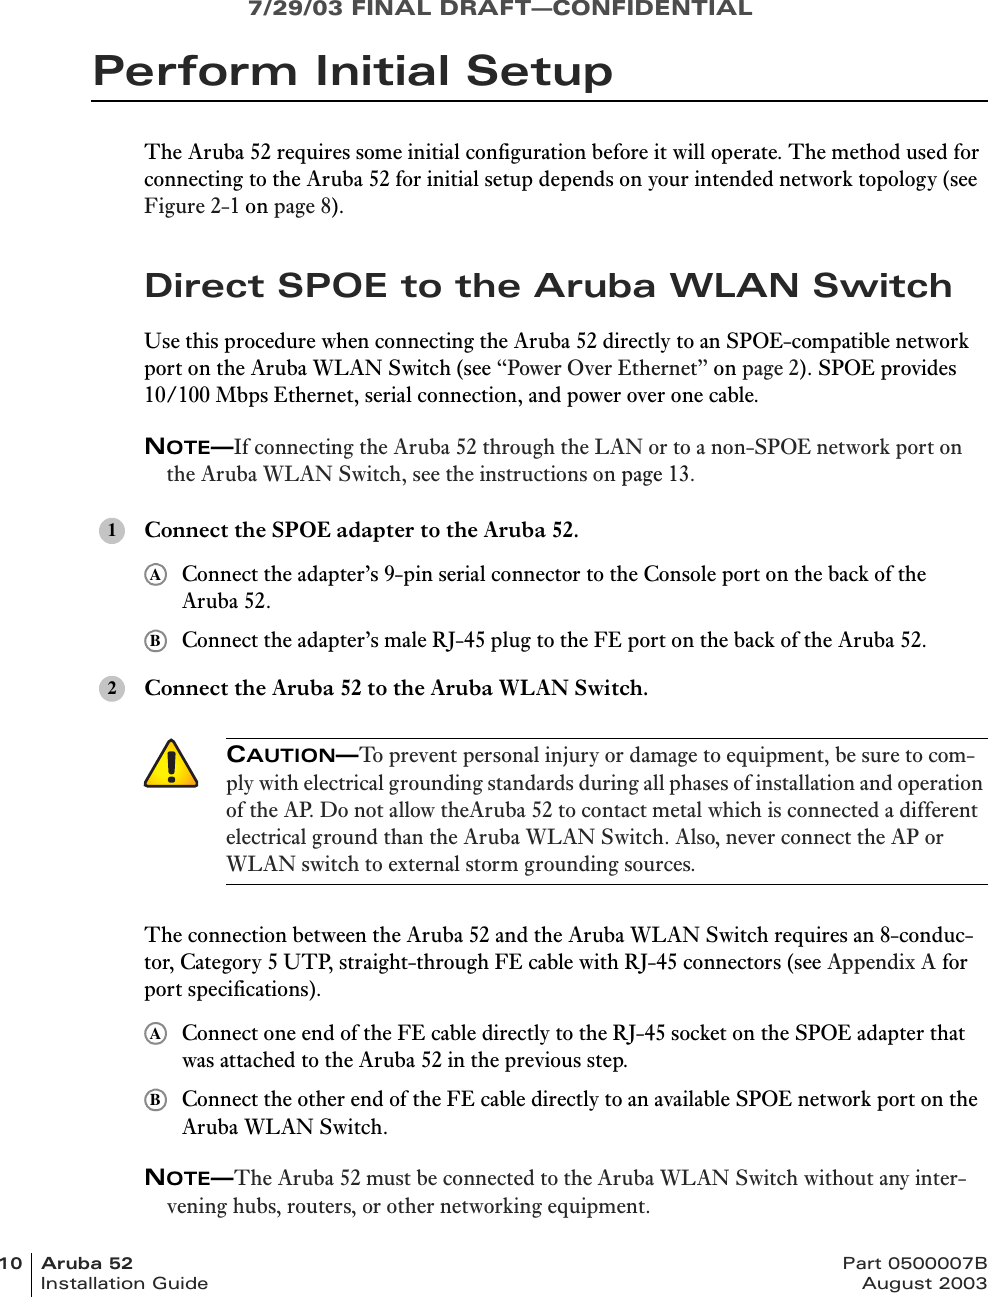 7/29/03 FINAL DRAFT—CONFIDENTIAL10 Aruba 52 Part 0500007BInstallation Guide August 2003Perform Initial SetupThe Aruba 52 requires some initial configuration before it will operate. The method used for connecting to the Aruba 52 for initial setup depends on your intended network topology (see Figure 2-1 on page 8).Direct SPOE to the Aruba WLAN SwitchUse this procedure when connecting the Aruba 52 directly to an SPOE-compatible network port on the Aruba WLAN Switch (see “Power Over Ethernet” on page 2). SPOE provides 10/100 Mbps Ethernet, serial connection, and power over one cable.NOTE—If connecting the Aruba 52 through the LAN or to a non-SPOE network port on the Aruba WLAN Switch, see the instructions on page 13.Connect the SPOE adapter to the Aruba 52.Connect the adapter’s 9-pin serial connector to the Console port on the back of the Aruba 52.Connect the adapter’s male RJ-45 plug to the FE port on the back of the Aruba 52.Connect the Aruba 52 to the Aruba WLAN Switch.The connection between the Aruba 52 and the Aruba WLAN Switch requires an 8-conduc-tor, Category 5 UTP, straight-through FE cable with RJ-45 connectors (see Appendix A for port specifications).Connect one end of the FE cable directly to the RJ-45 socket on the SPOE adapter that was attached to the Aruba 52 in the previous step.Connect the other end of the FE cable directly to an available SPOE network port on the Aruba WLAN Switch.NOTE—The Aruba 52 must be connected to the Aruba WLAN Switch without any inter-vening hubs, routers, or other networking equipment.1AB2CAUTION—To prevent personal injury or damage to equipment, be sure to com-ply with electrical grounding standards during all phases of installation and operation of the AP. Do not allow theAruba 52 to contact metal which is connected a different electrical ground than the Aruba WLAN Switch. Also, never connect the AP or WLAN switch to external storm grounding sources.AB